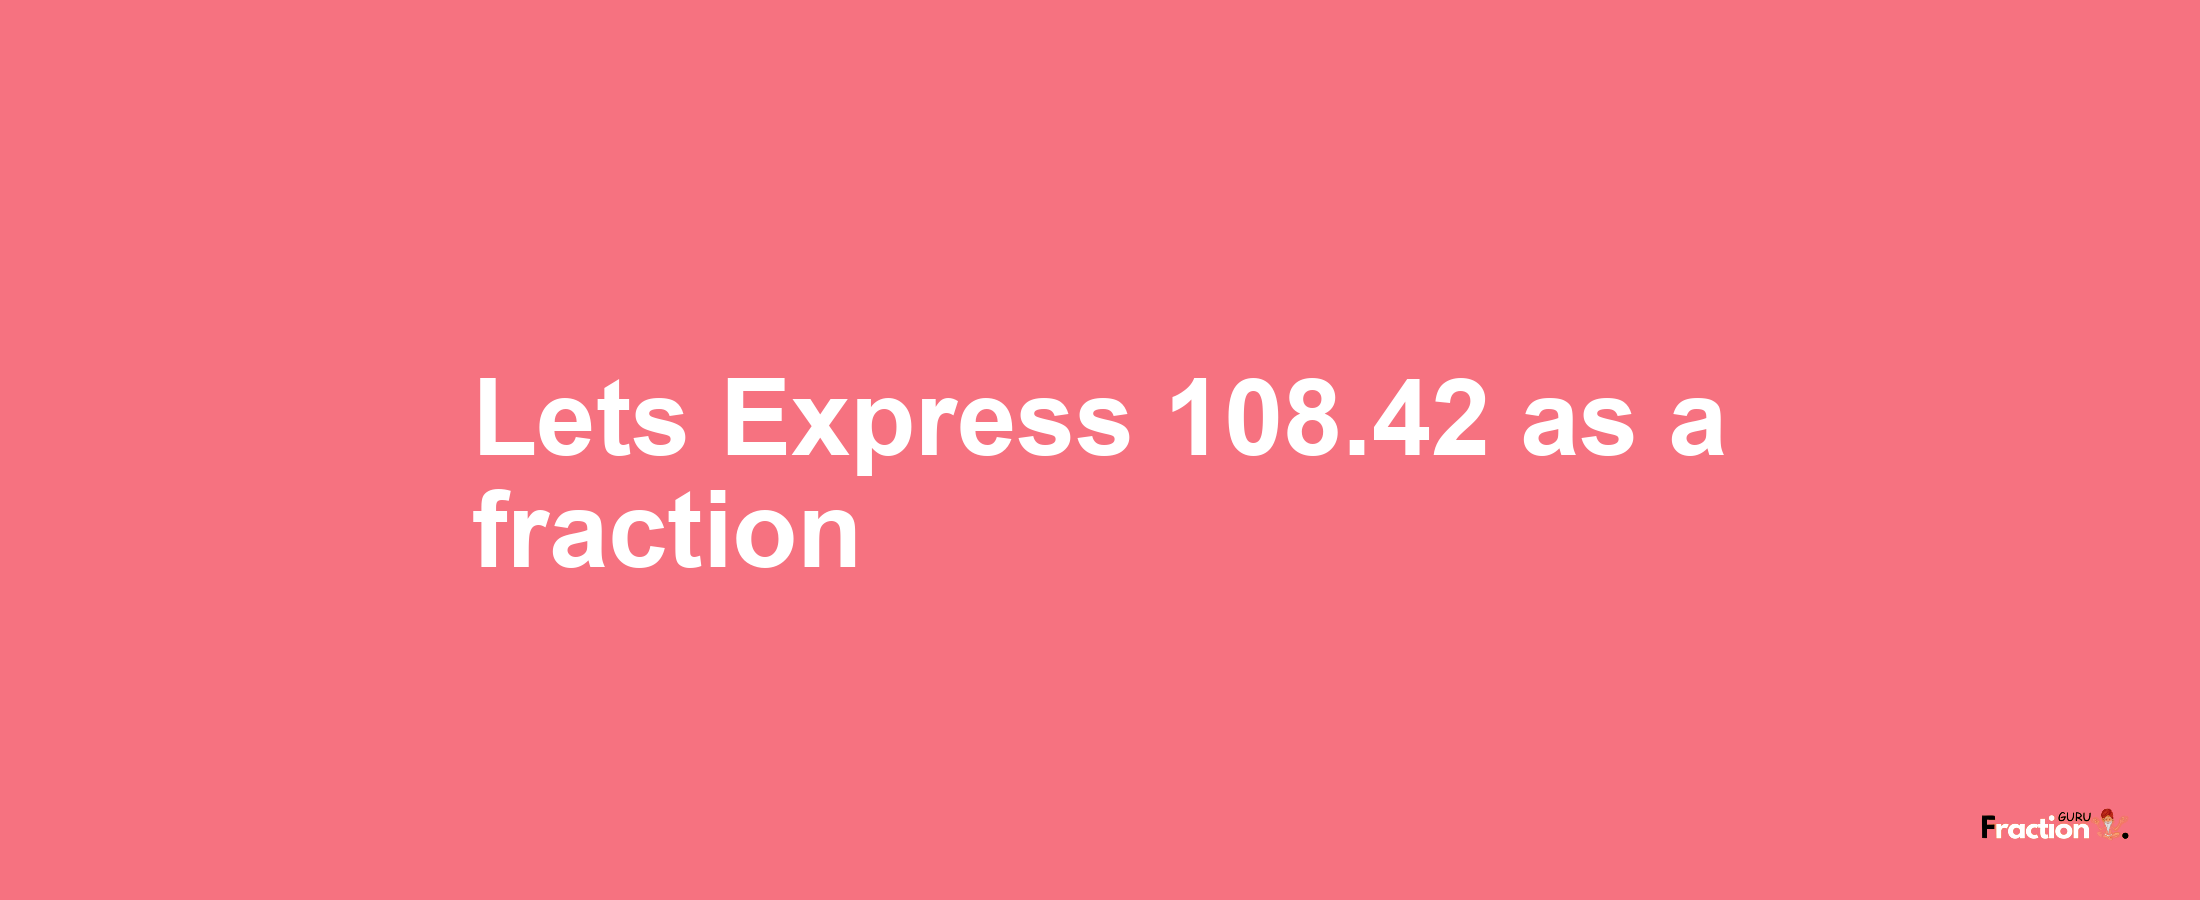 Lets Express 108.42 as afraction